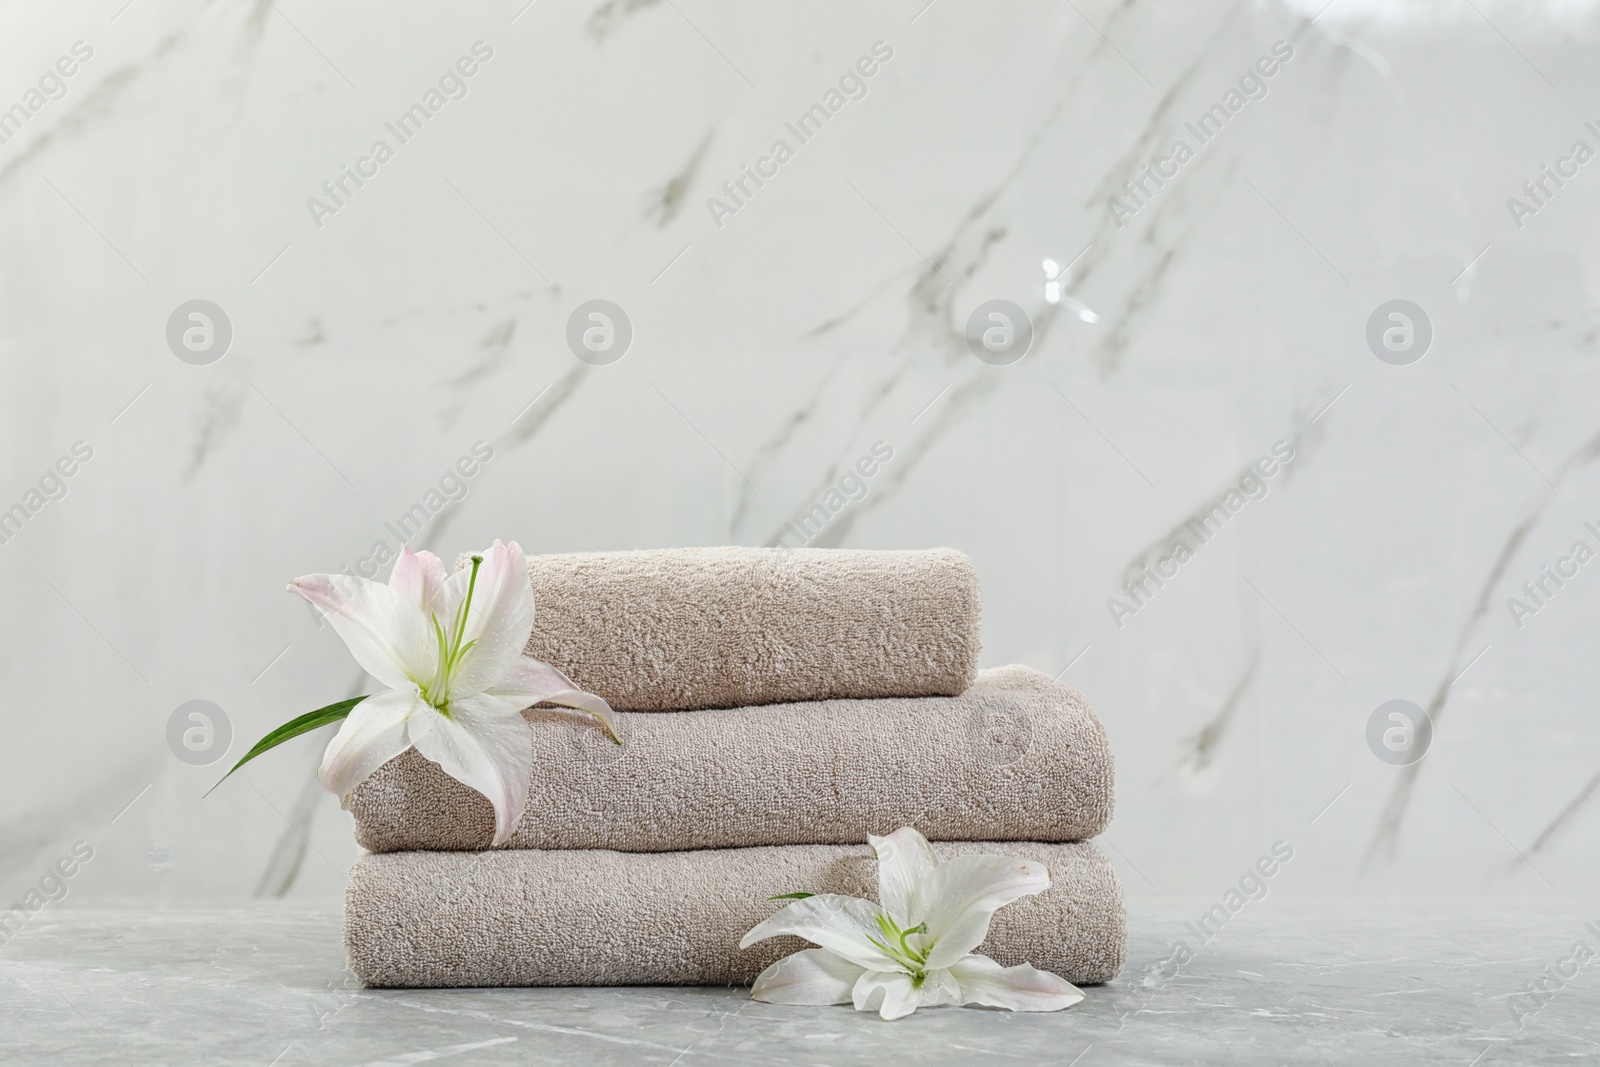 Photo of Stack of fresh towels with flowers on grey table against light background. Space for text